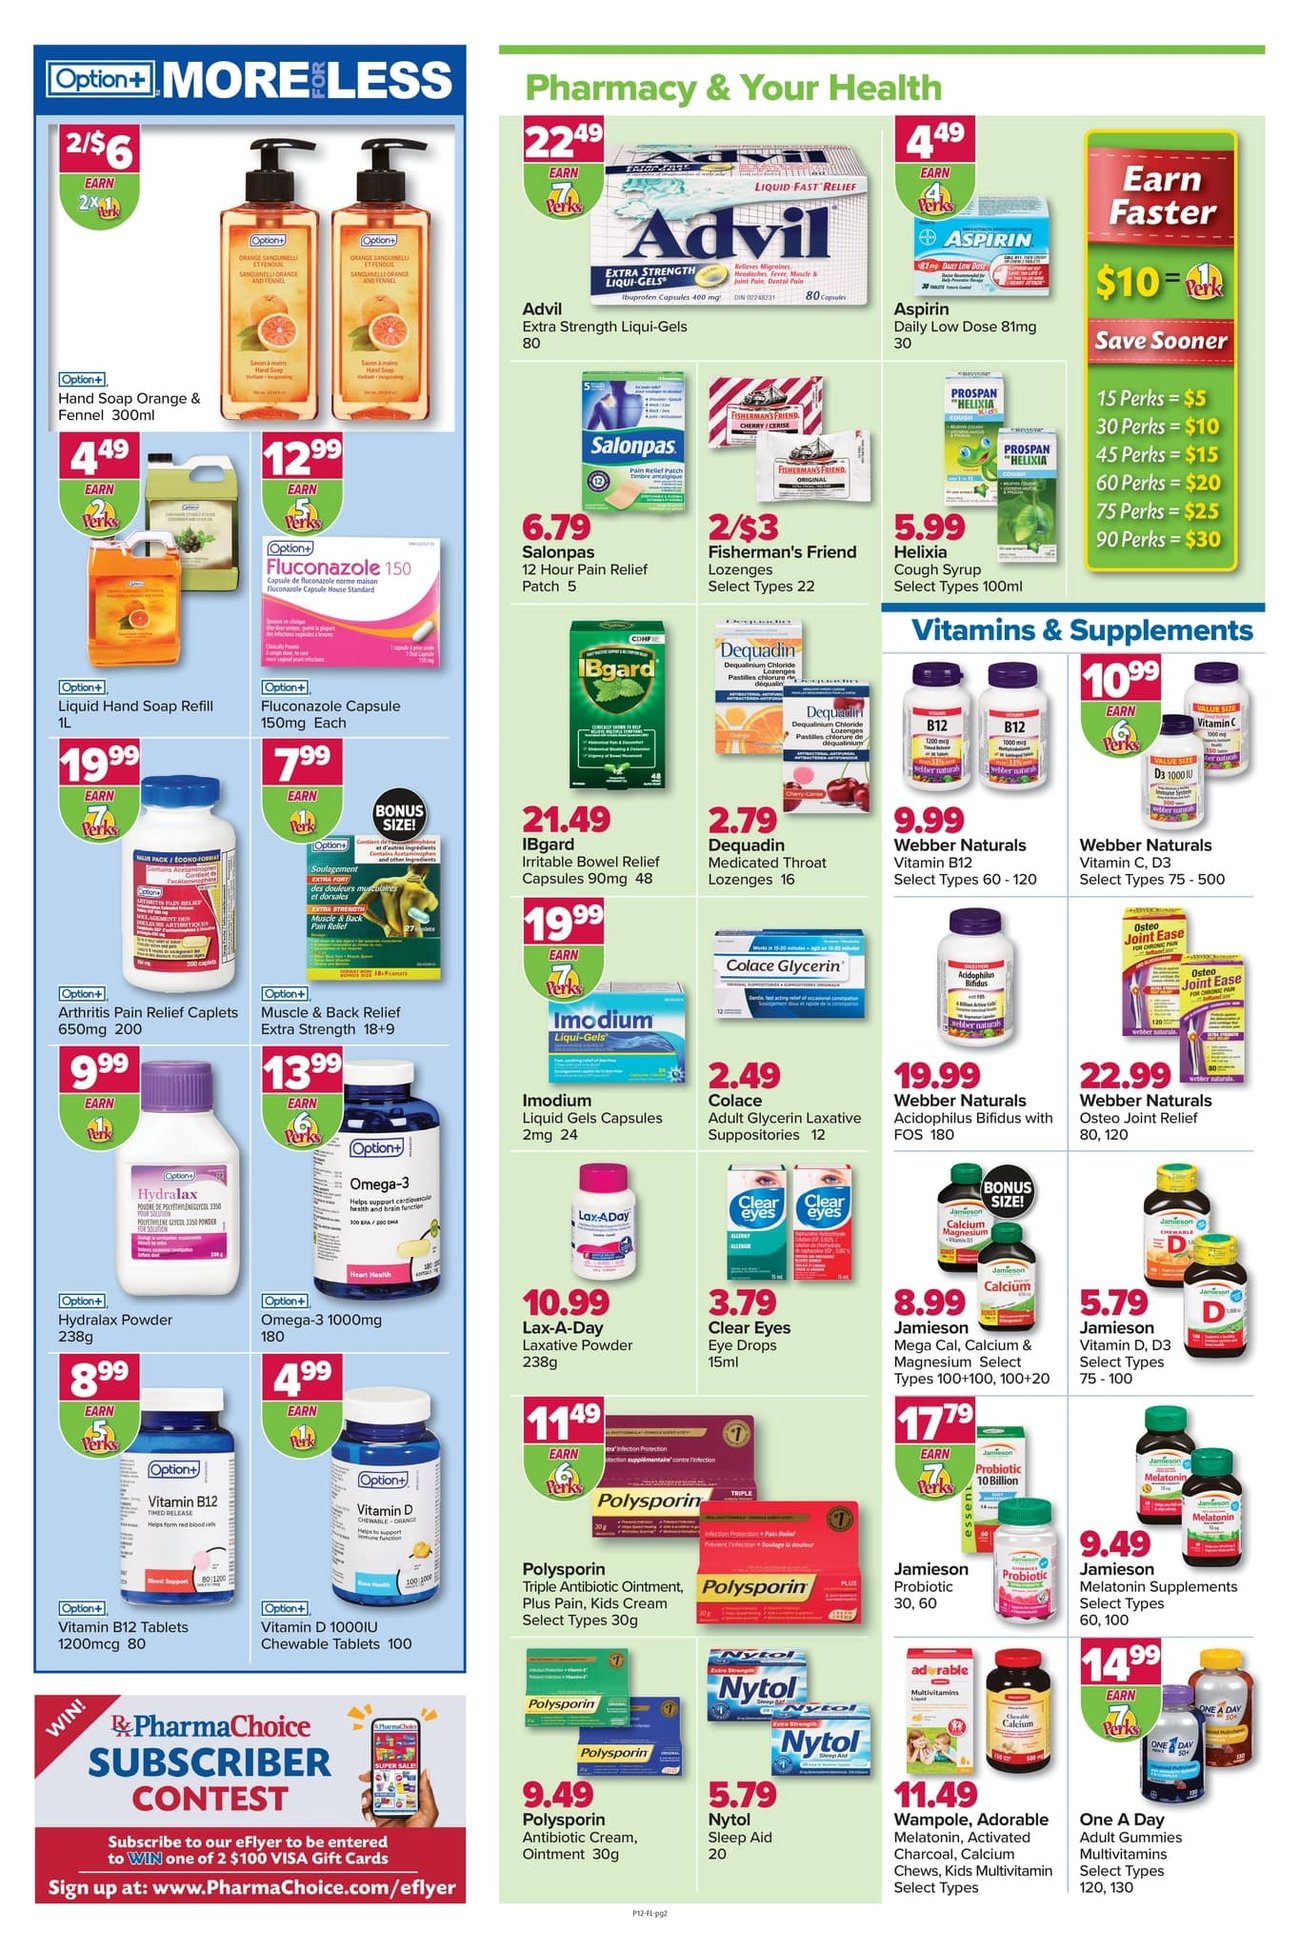 PharmaChoice - Weekly Flyer Specials - Page 2